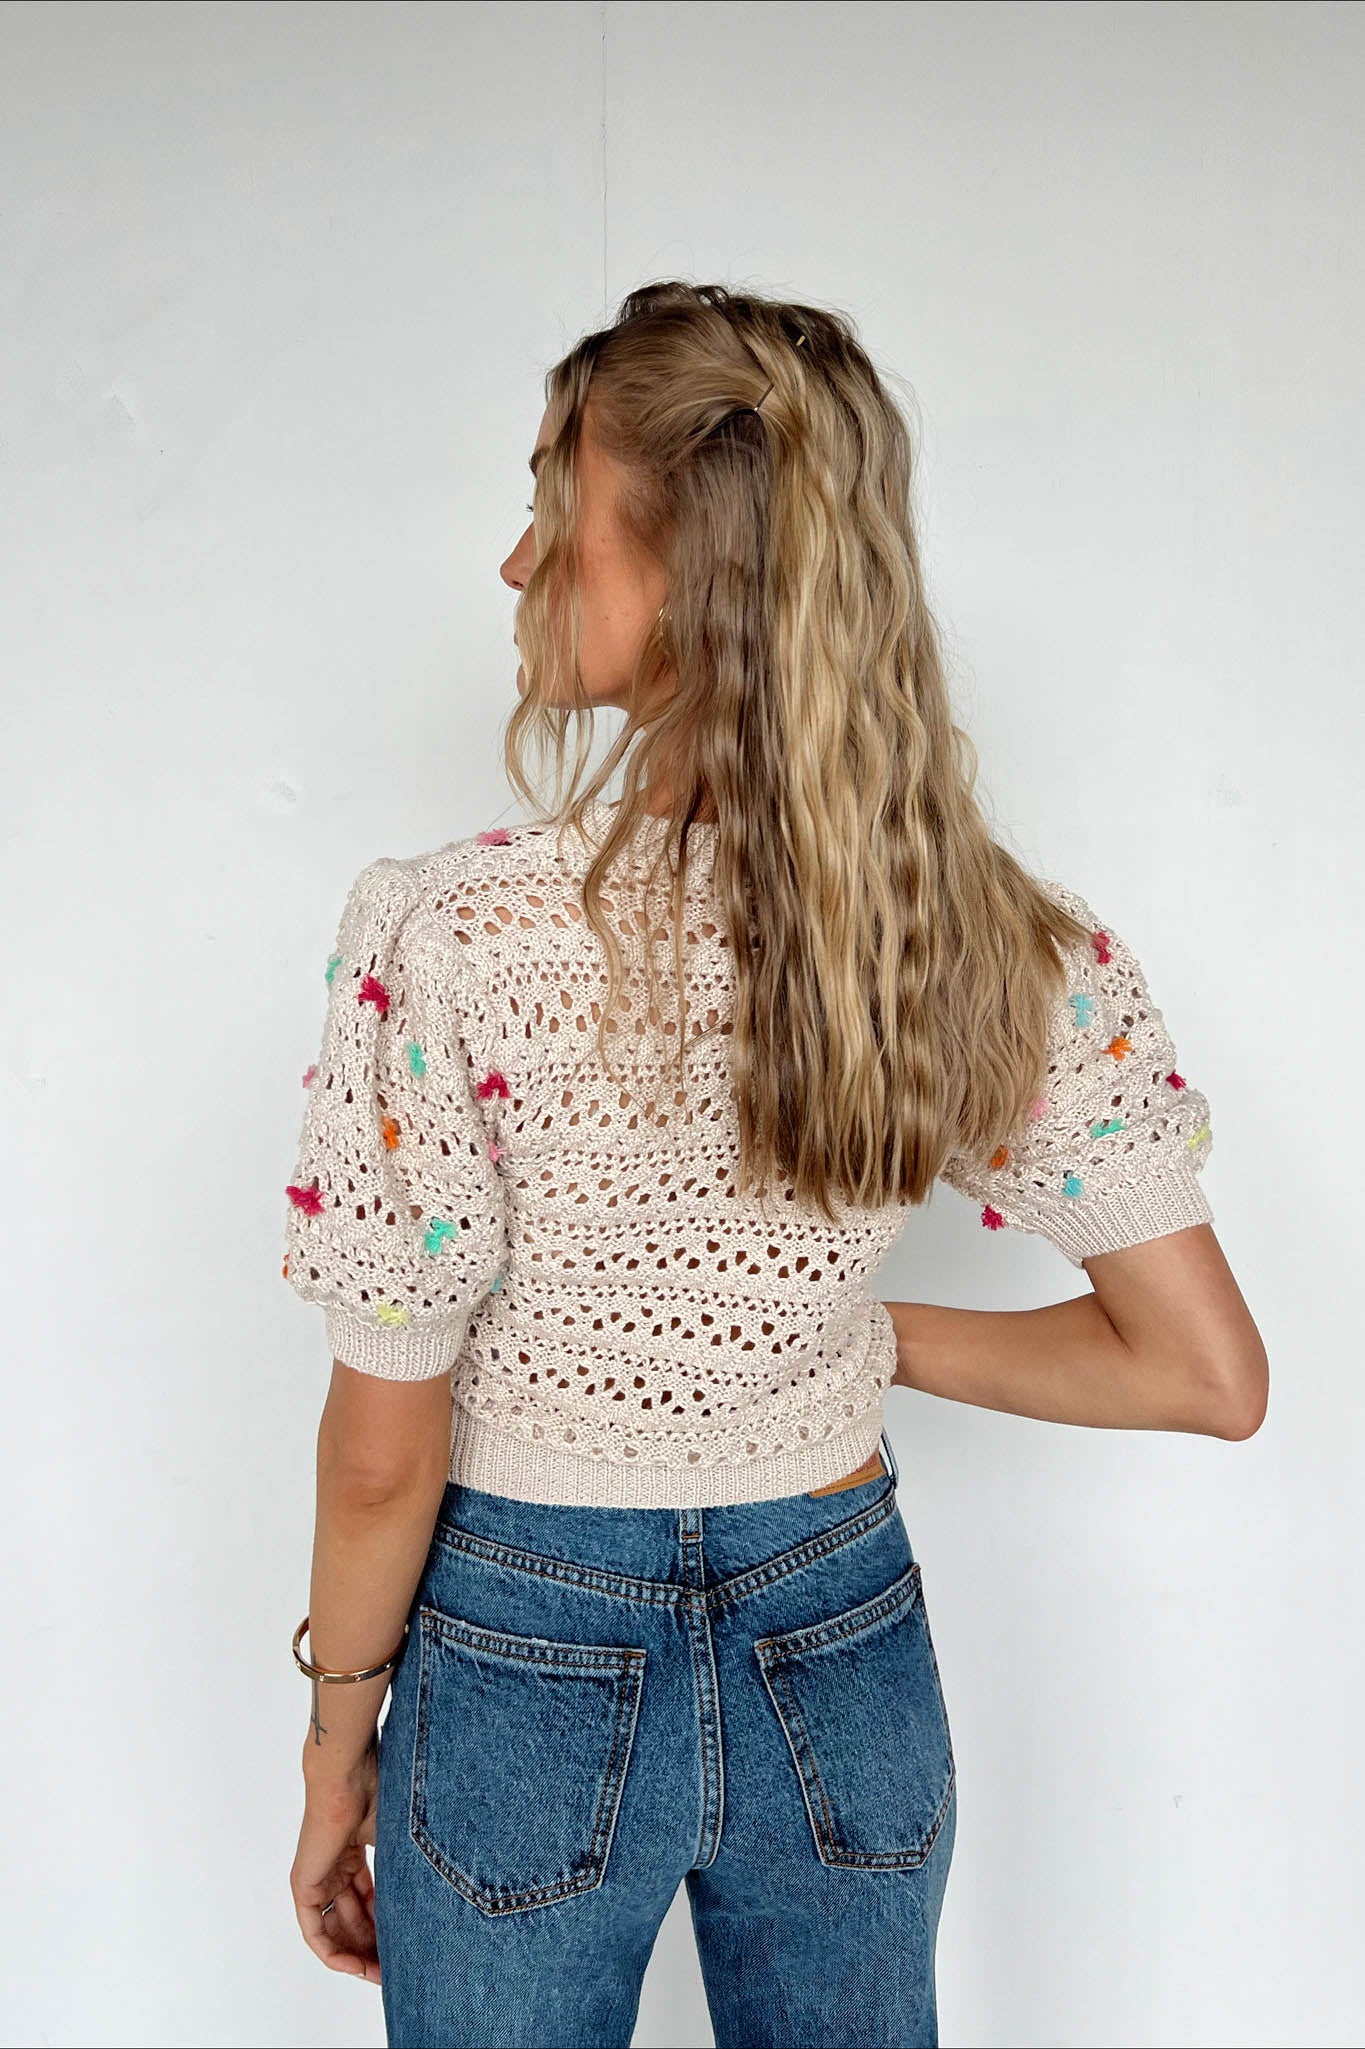 beige yarn top with colorful pom poms